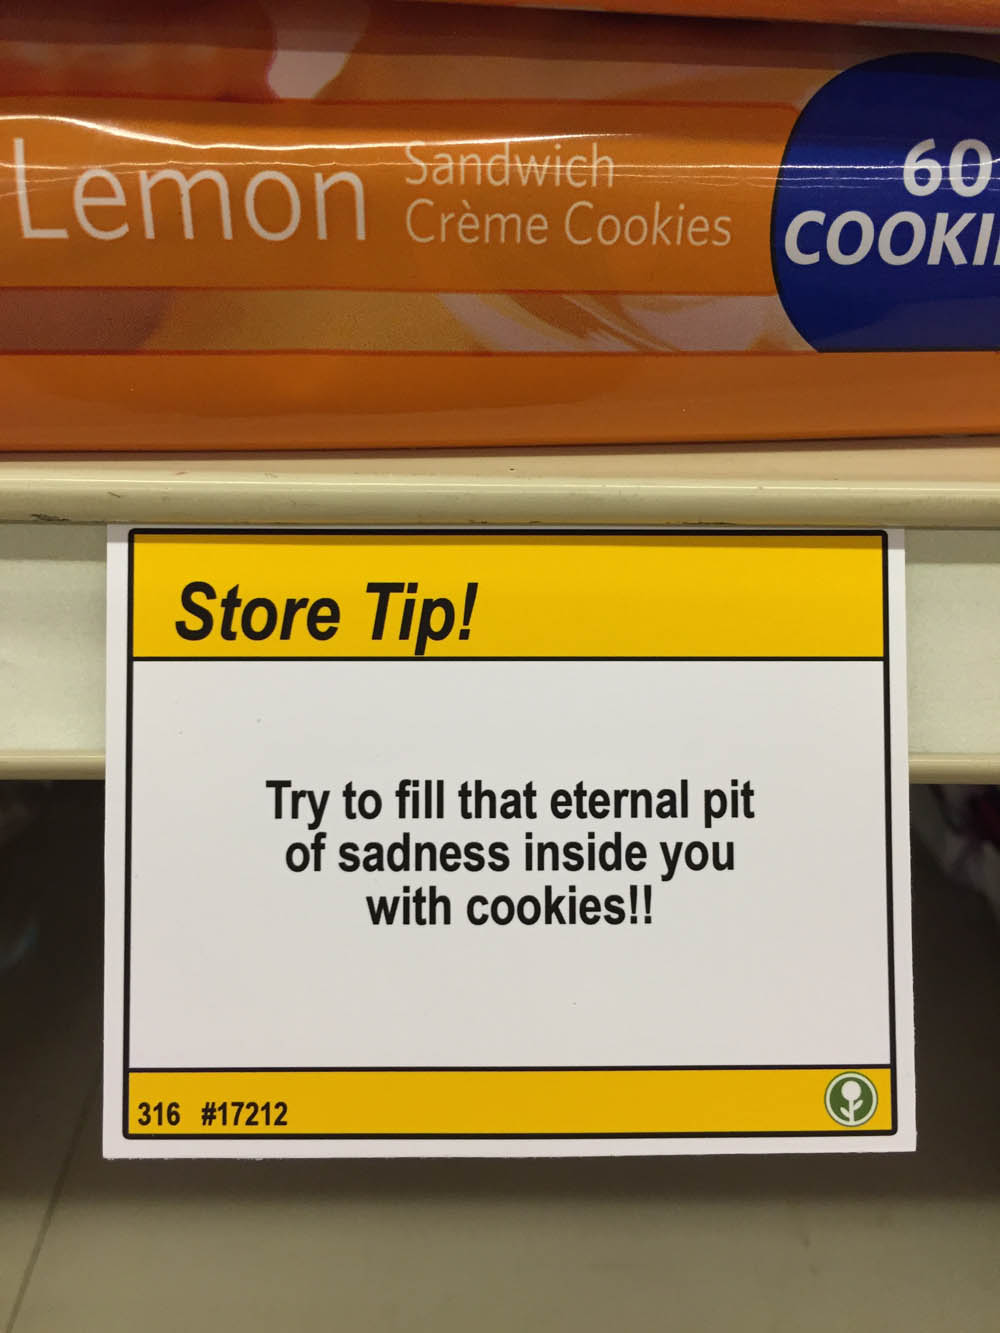 funny signs obvious plant - Sandwich Lemon Crme Cookies 60 Cooki Store Tip! Try to fill that eternal pit of sadness inside you with cookies!! 316